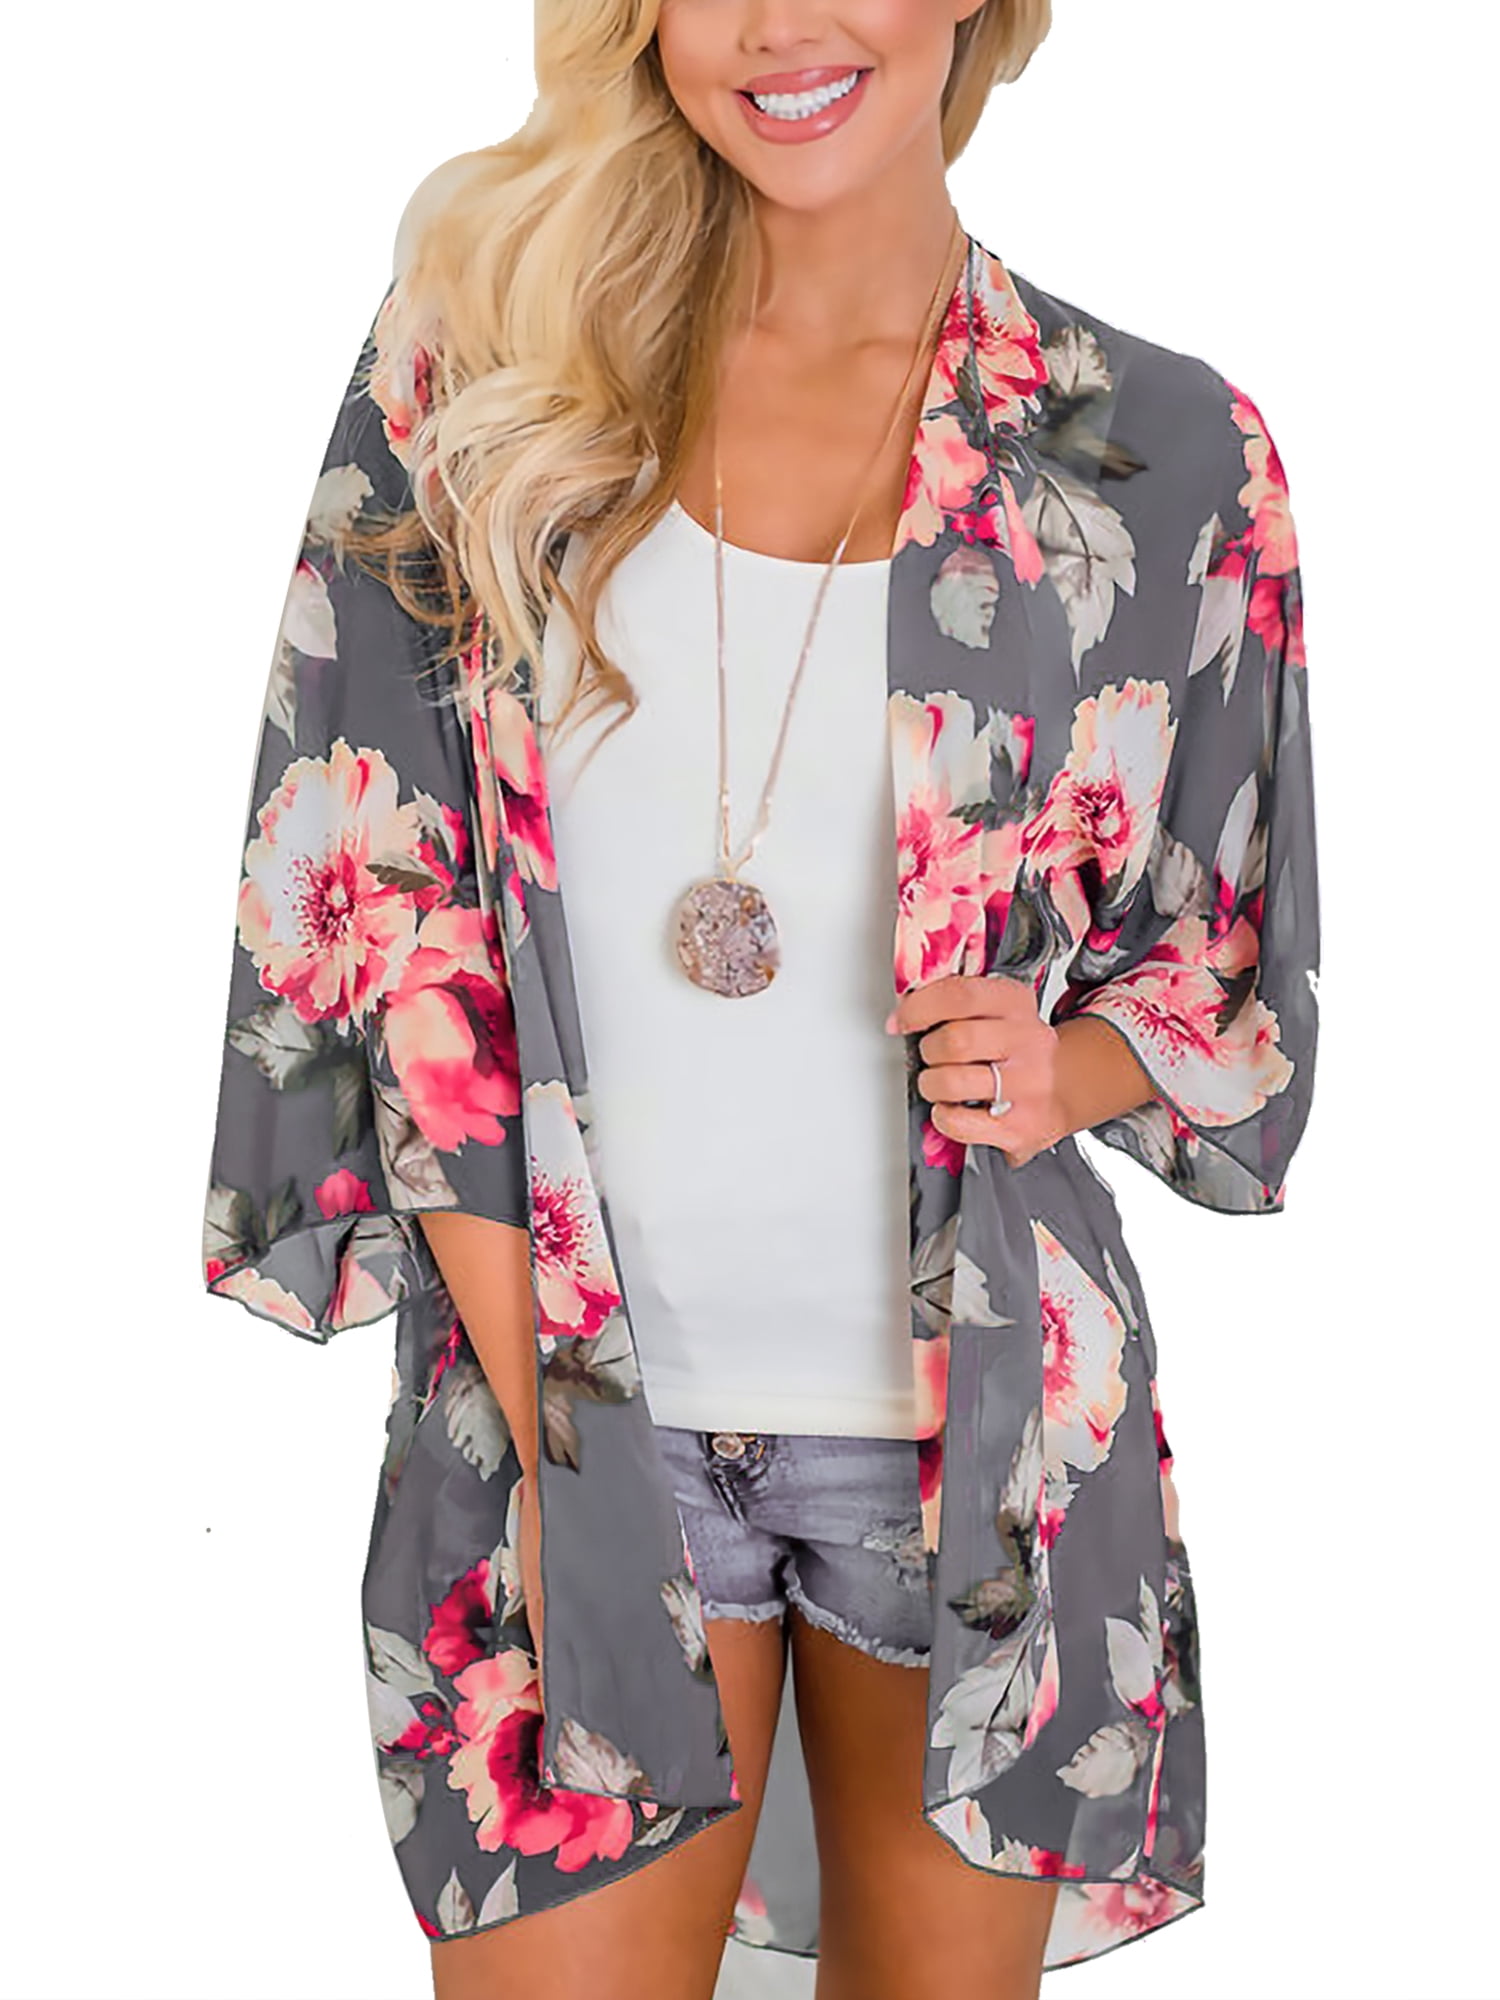 Plus Size Chiffon Cardigan for Womens Floral Print Sheer Loose Kimono Cardigan Blouse Ladies Summer Loose Beach Cover up